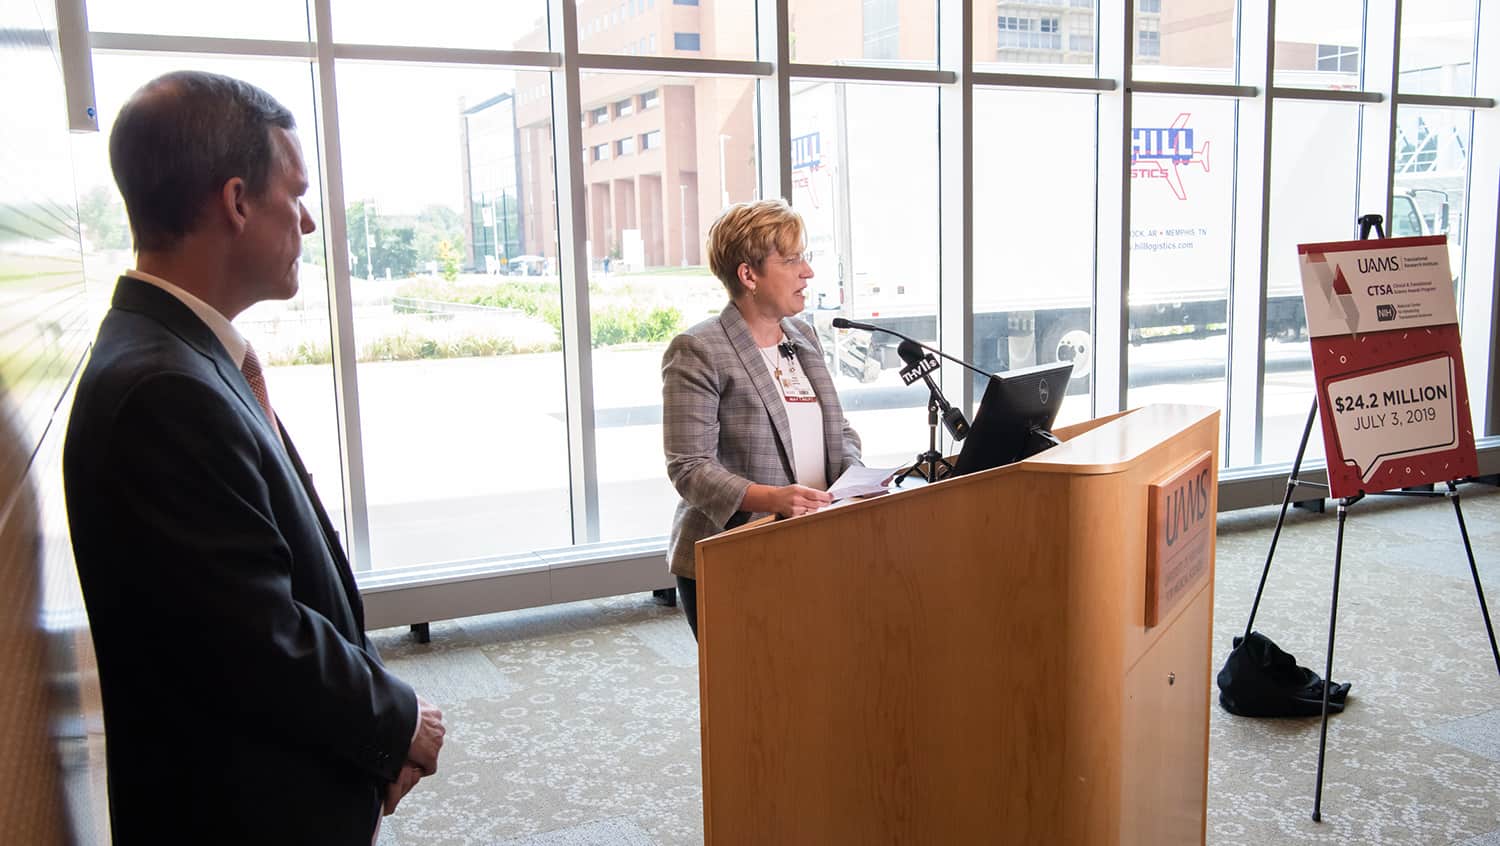 UAMS Chancellor Cam Patterson, left, listens to Laura James, M.D., director of the UAMS Translational Research Institute after both of them announced $24.2 million in new funding for the institute.